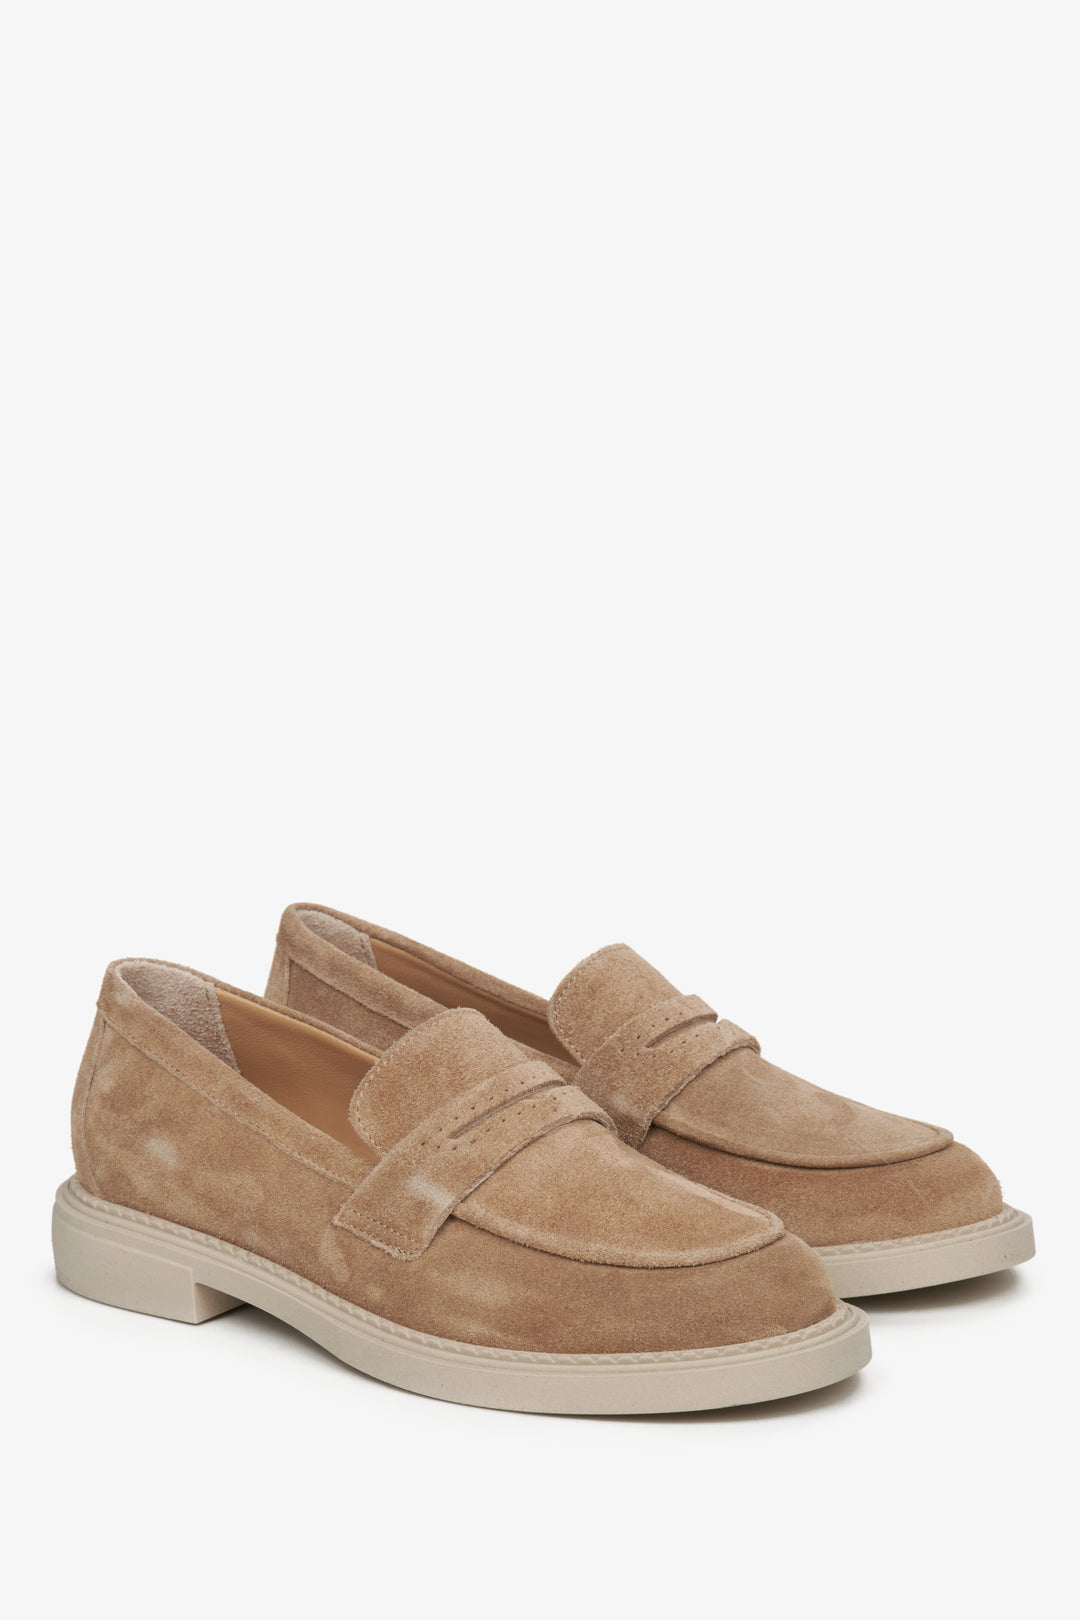 Women's brown velour loafers for spring Estro.